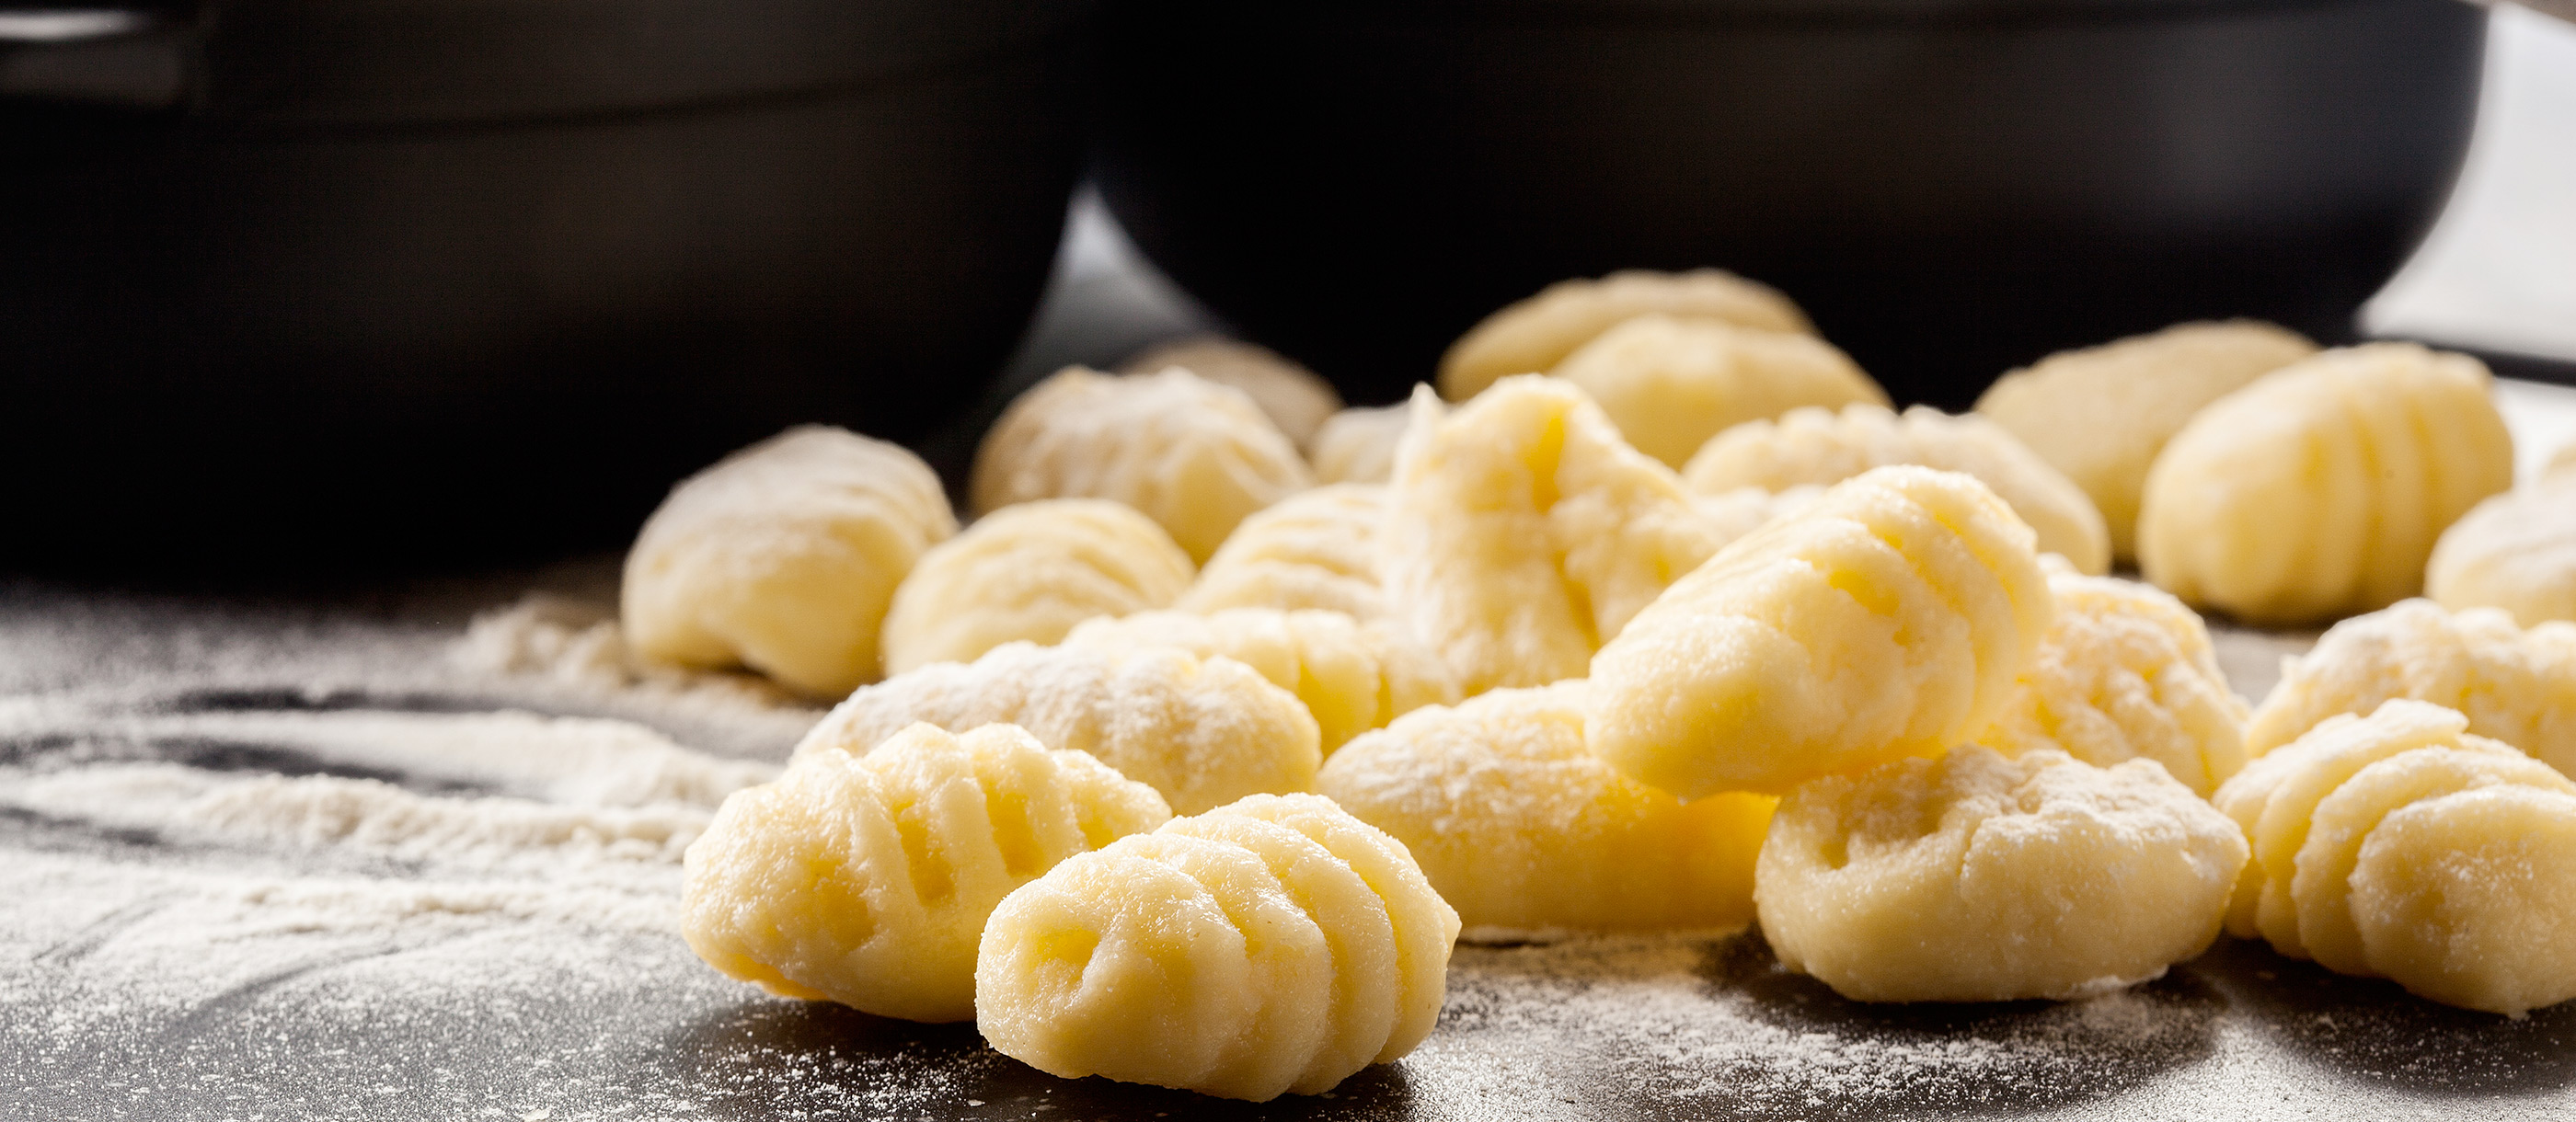 Gnocchi | Local Pasta Variety From Italy